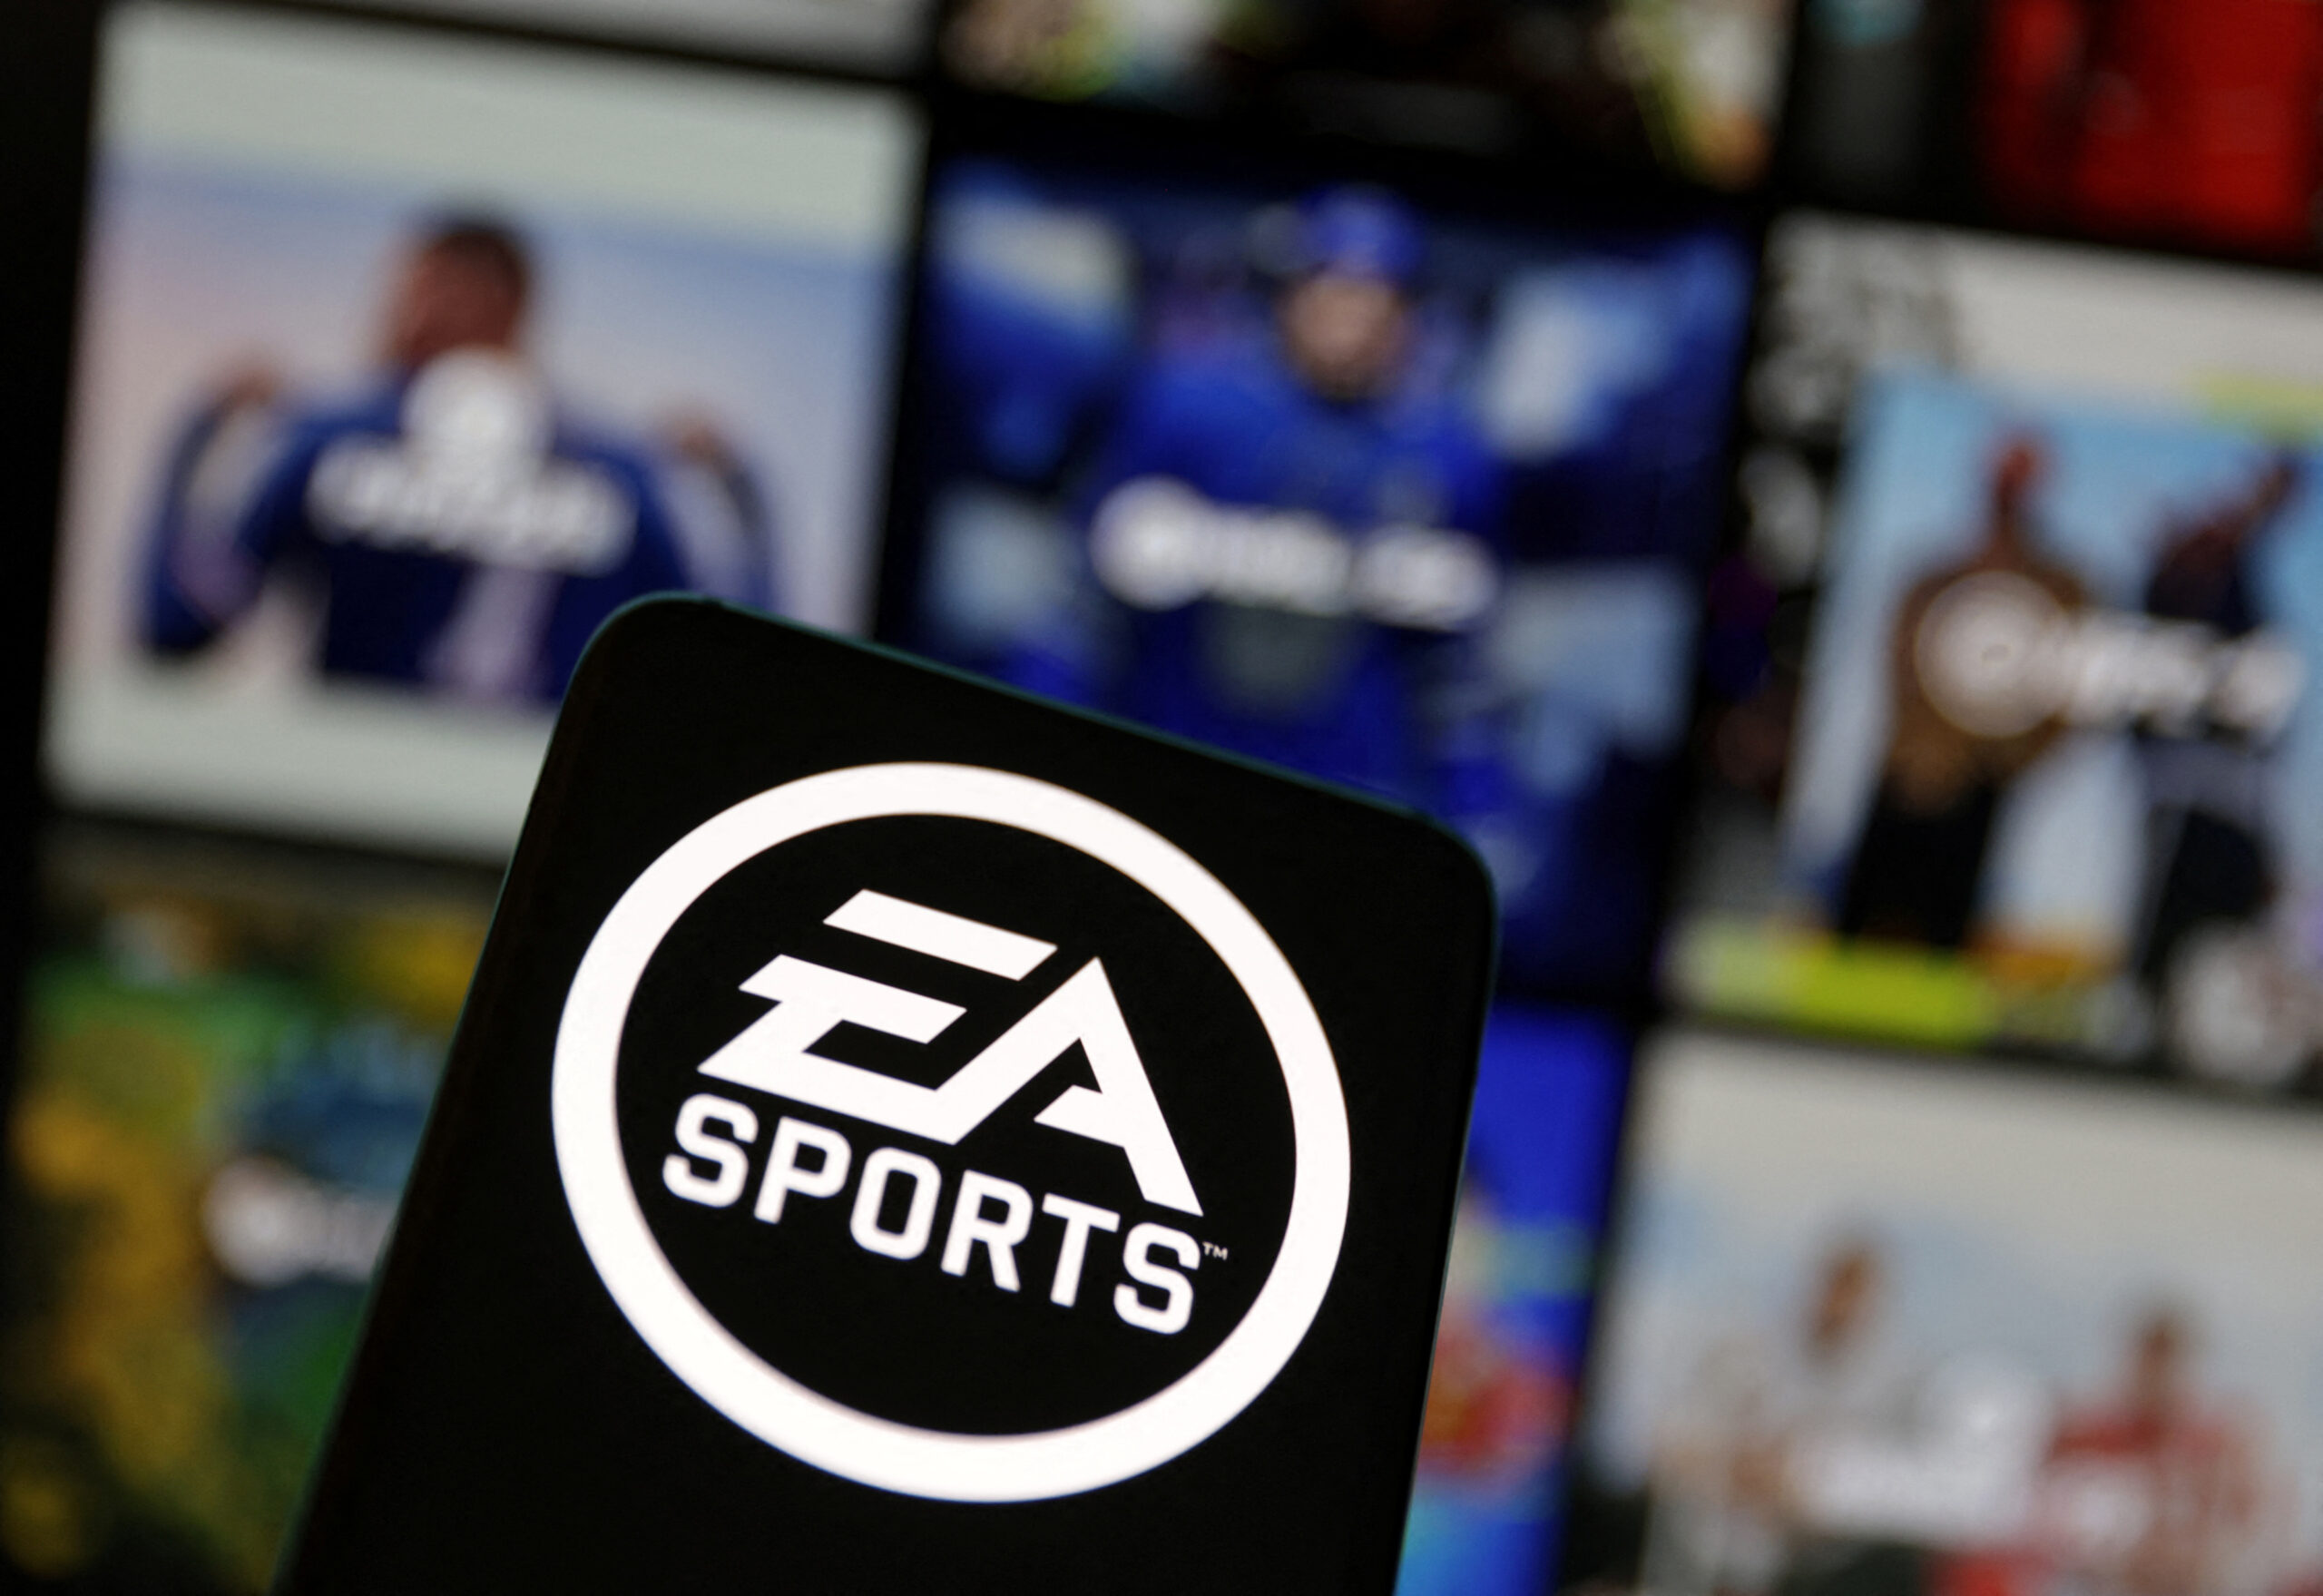 Electronic Arts forecasts annual bookings below estimates as gamers cut spending